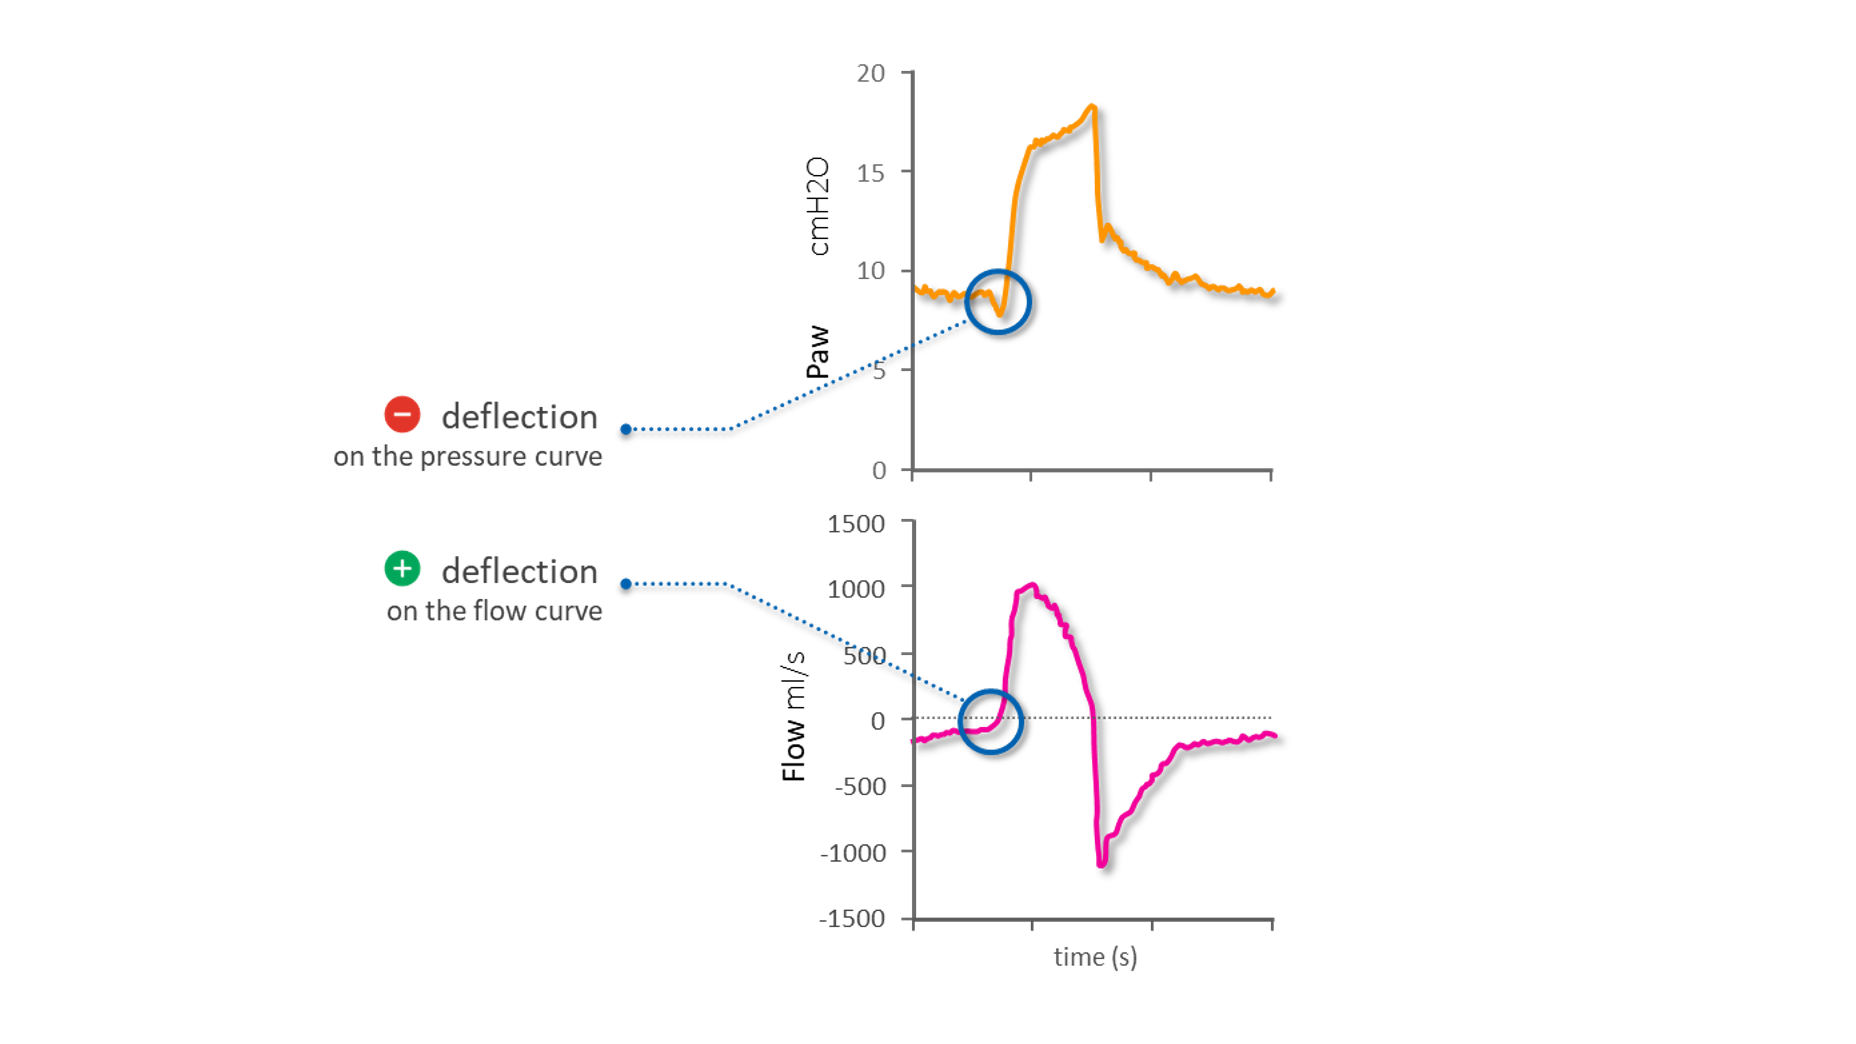 Diagrams representing pressure and flow waveforms showing start of inspiration